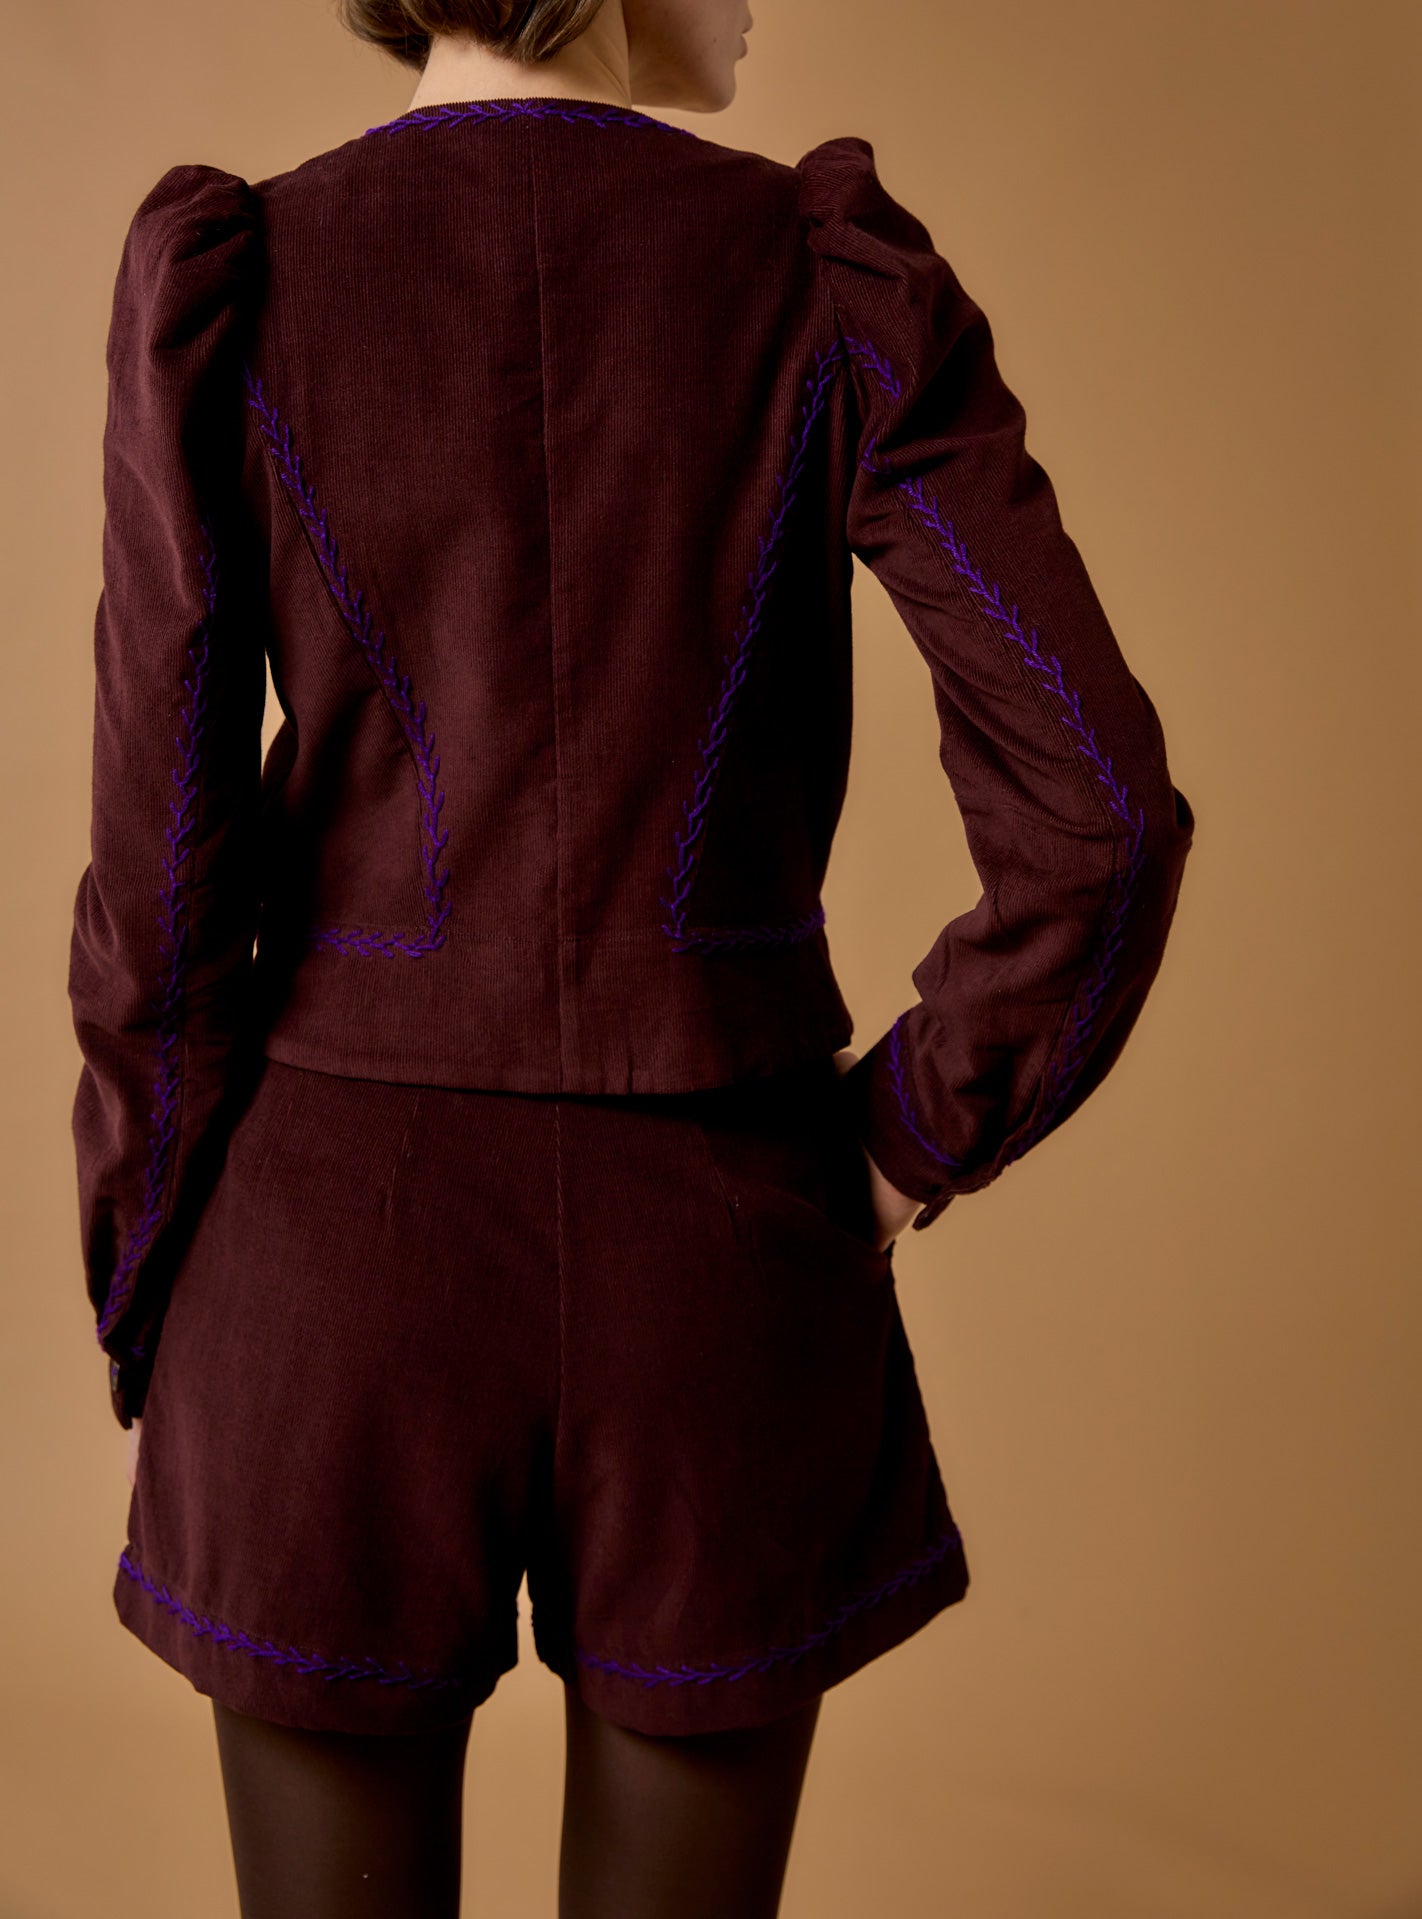 Chocalate  cotton corduroy Jacket & Short - Arabella & Kenya  by Thierry Colson - Wool embroidered - Back view